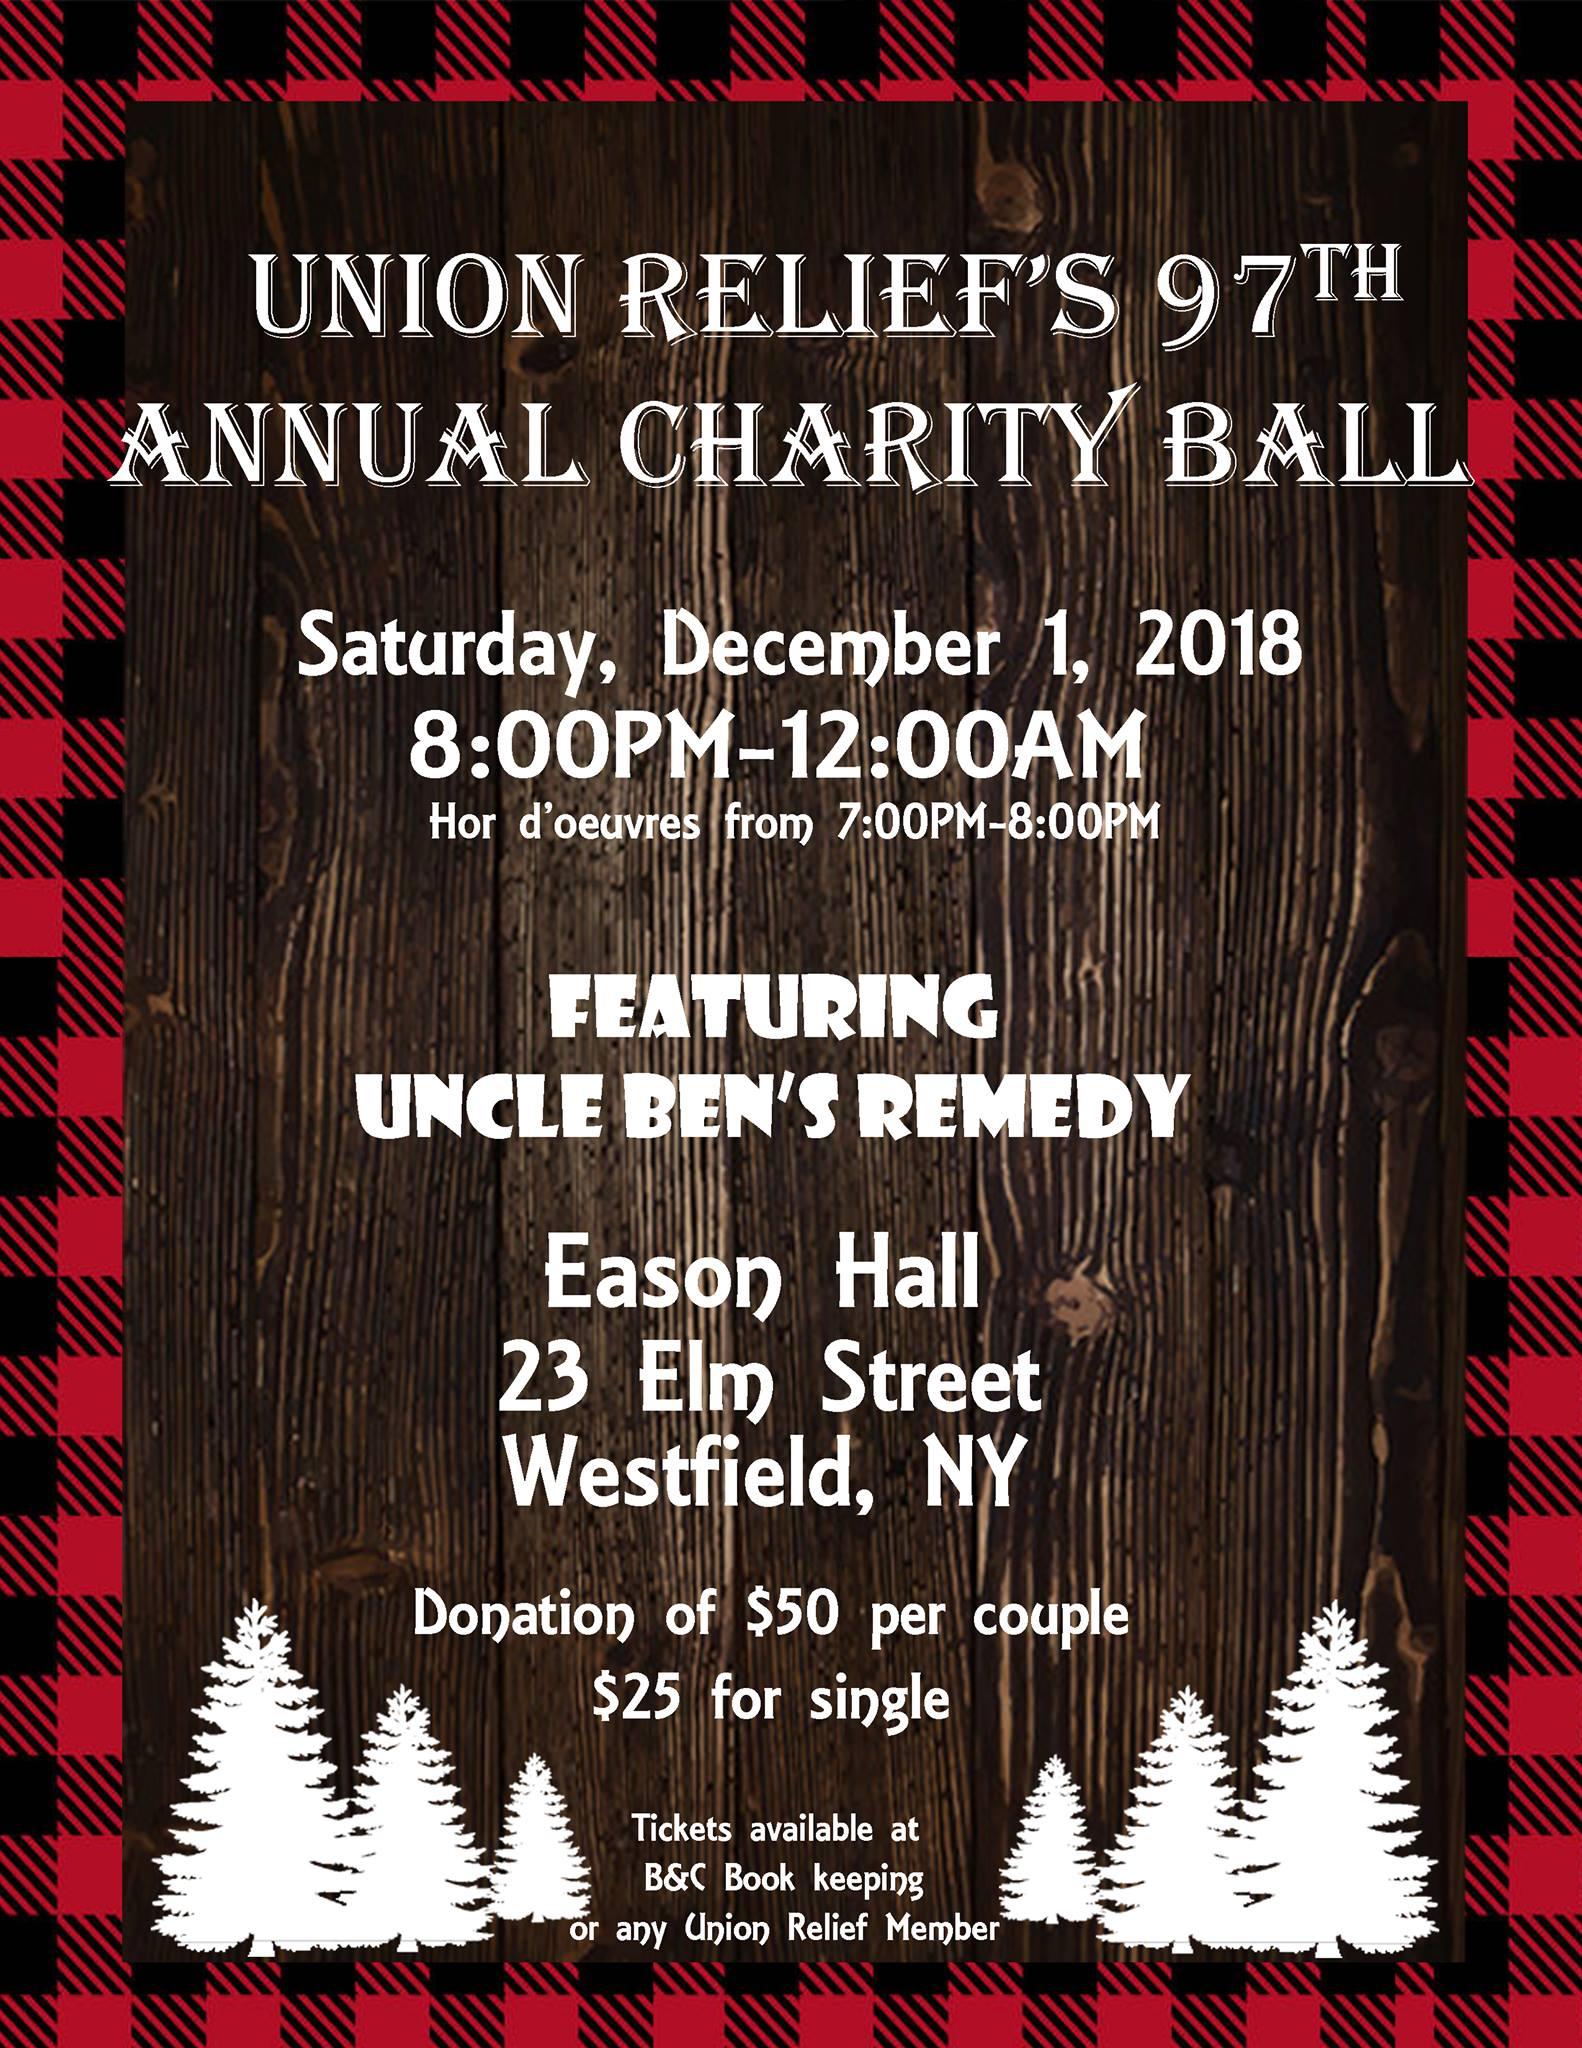 Union Relief's 97th Annual Charity Ball